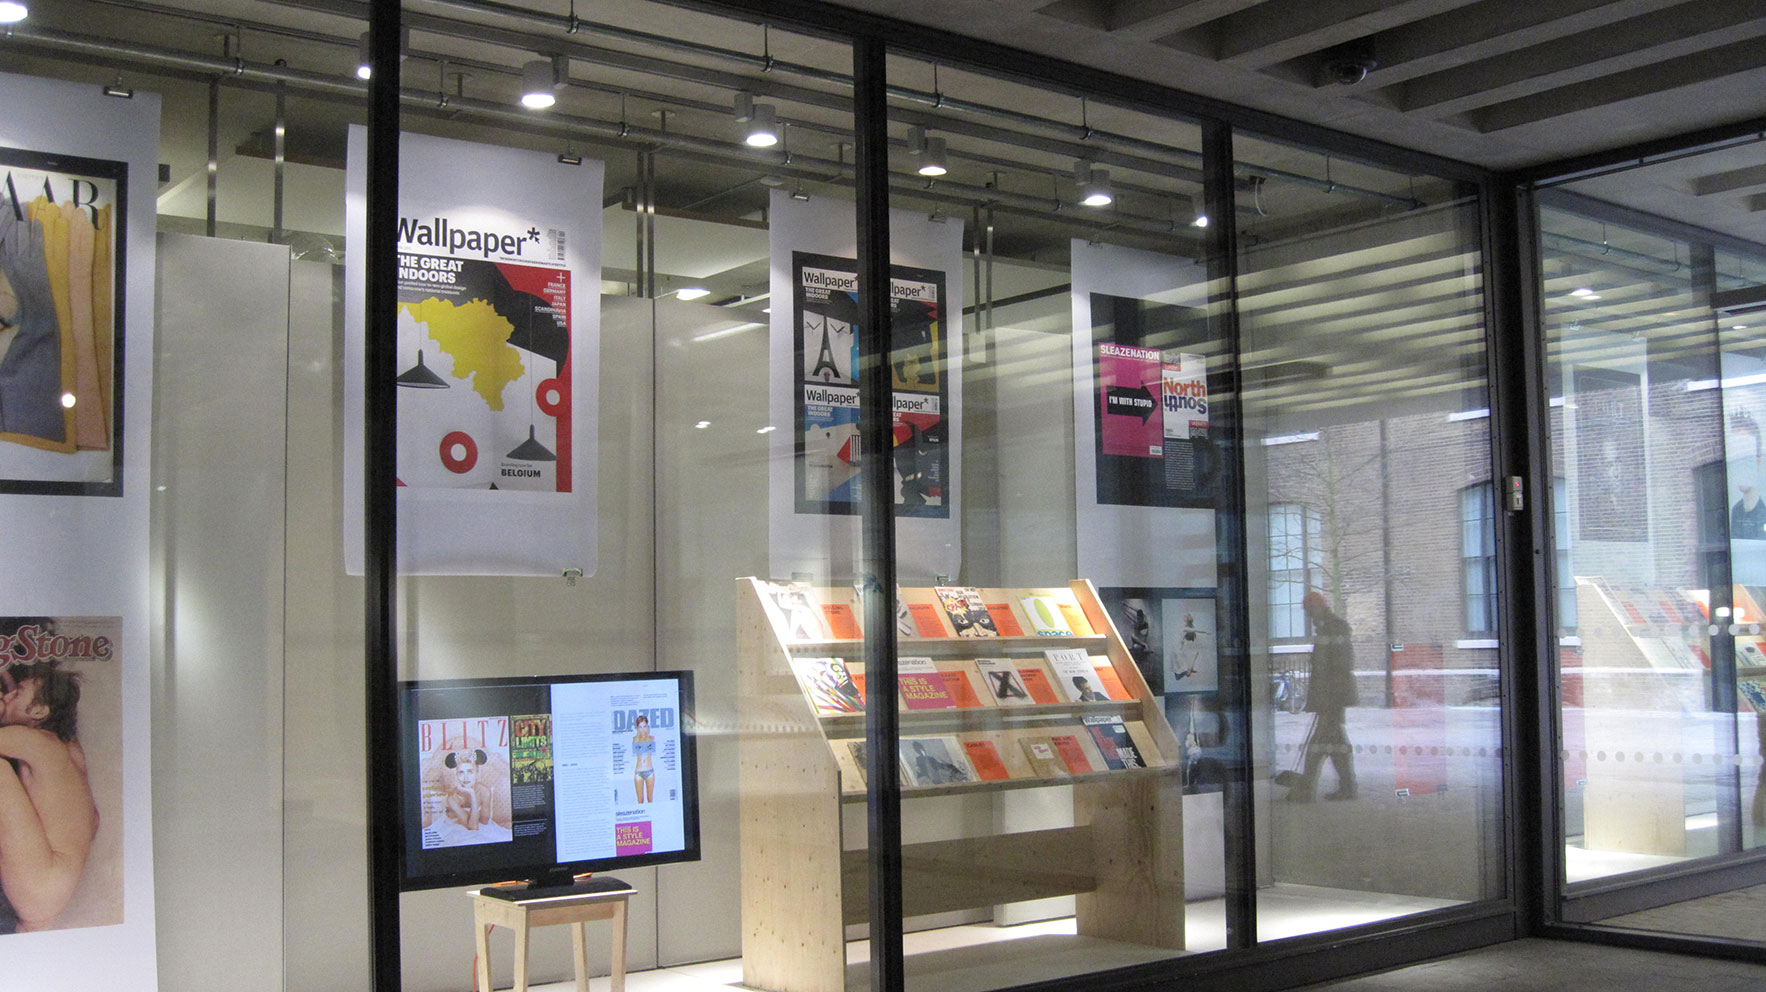 Exhibition on editorial design in the window galleries.